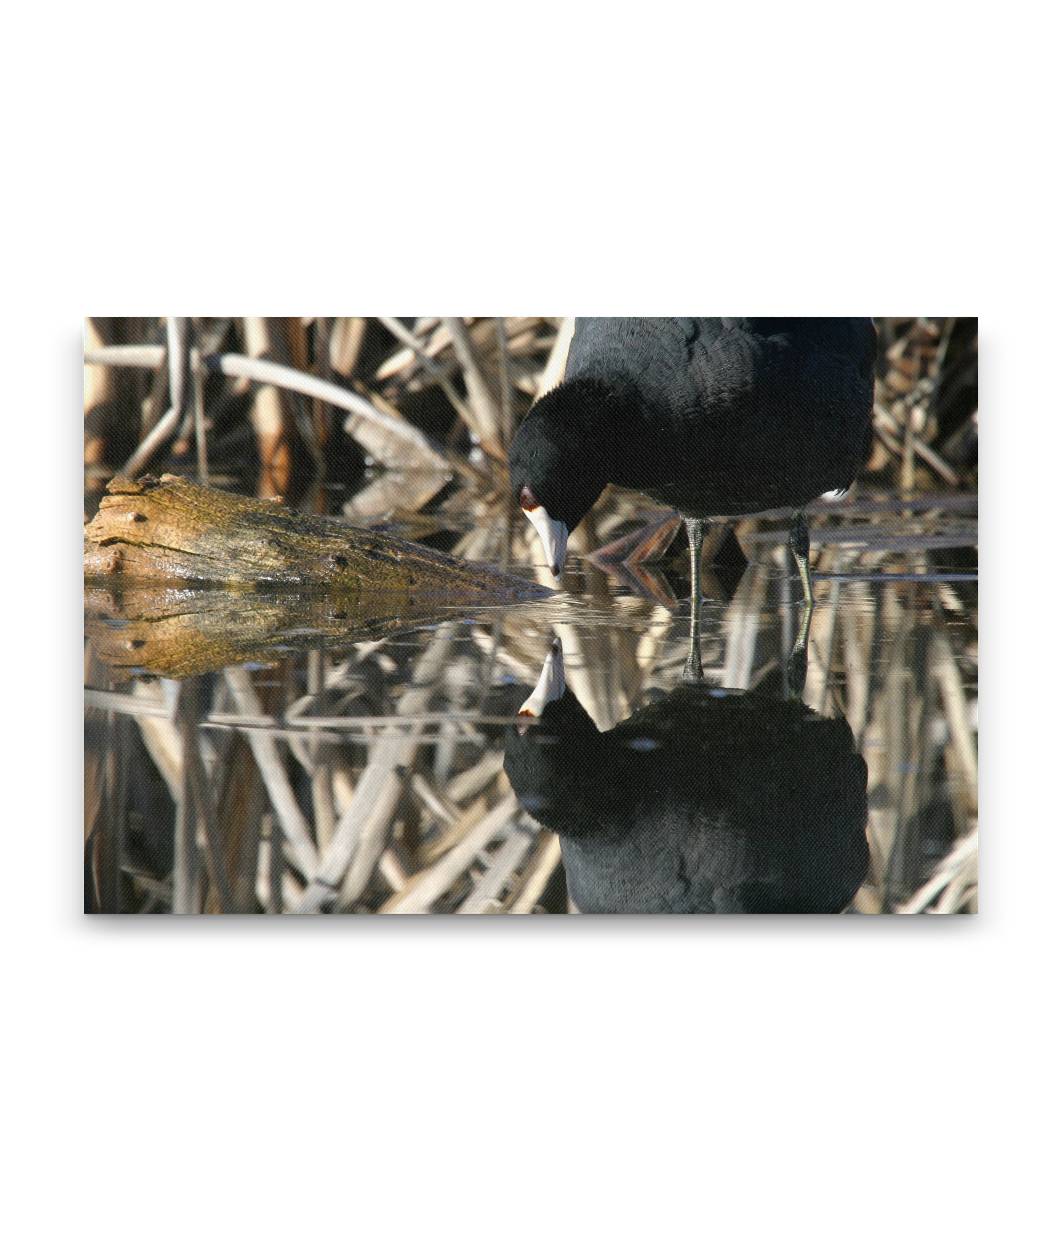 American Coot and Reflection, Tule Lake National Wildlife Refuge, California